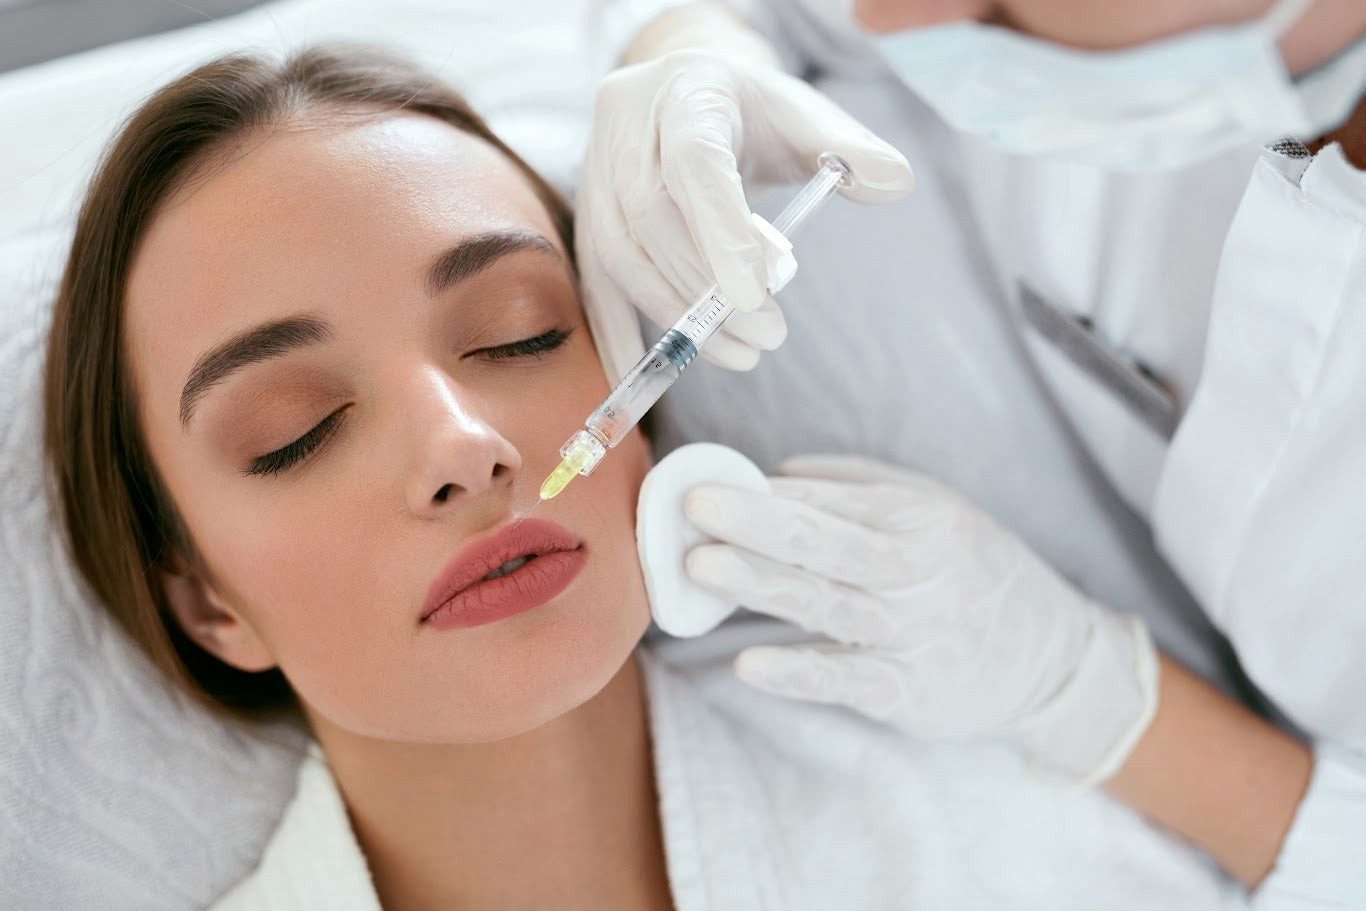 Elevate Your Lip Filler Skills: A Sneak Peek into the Next Advanced Course for Experienced Injectors